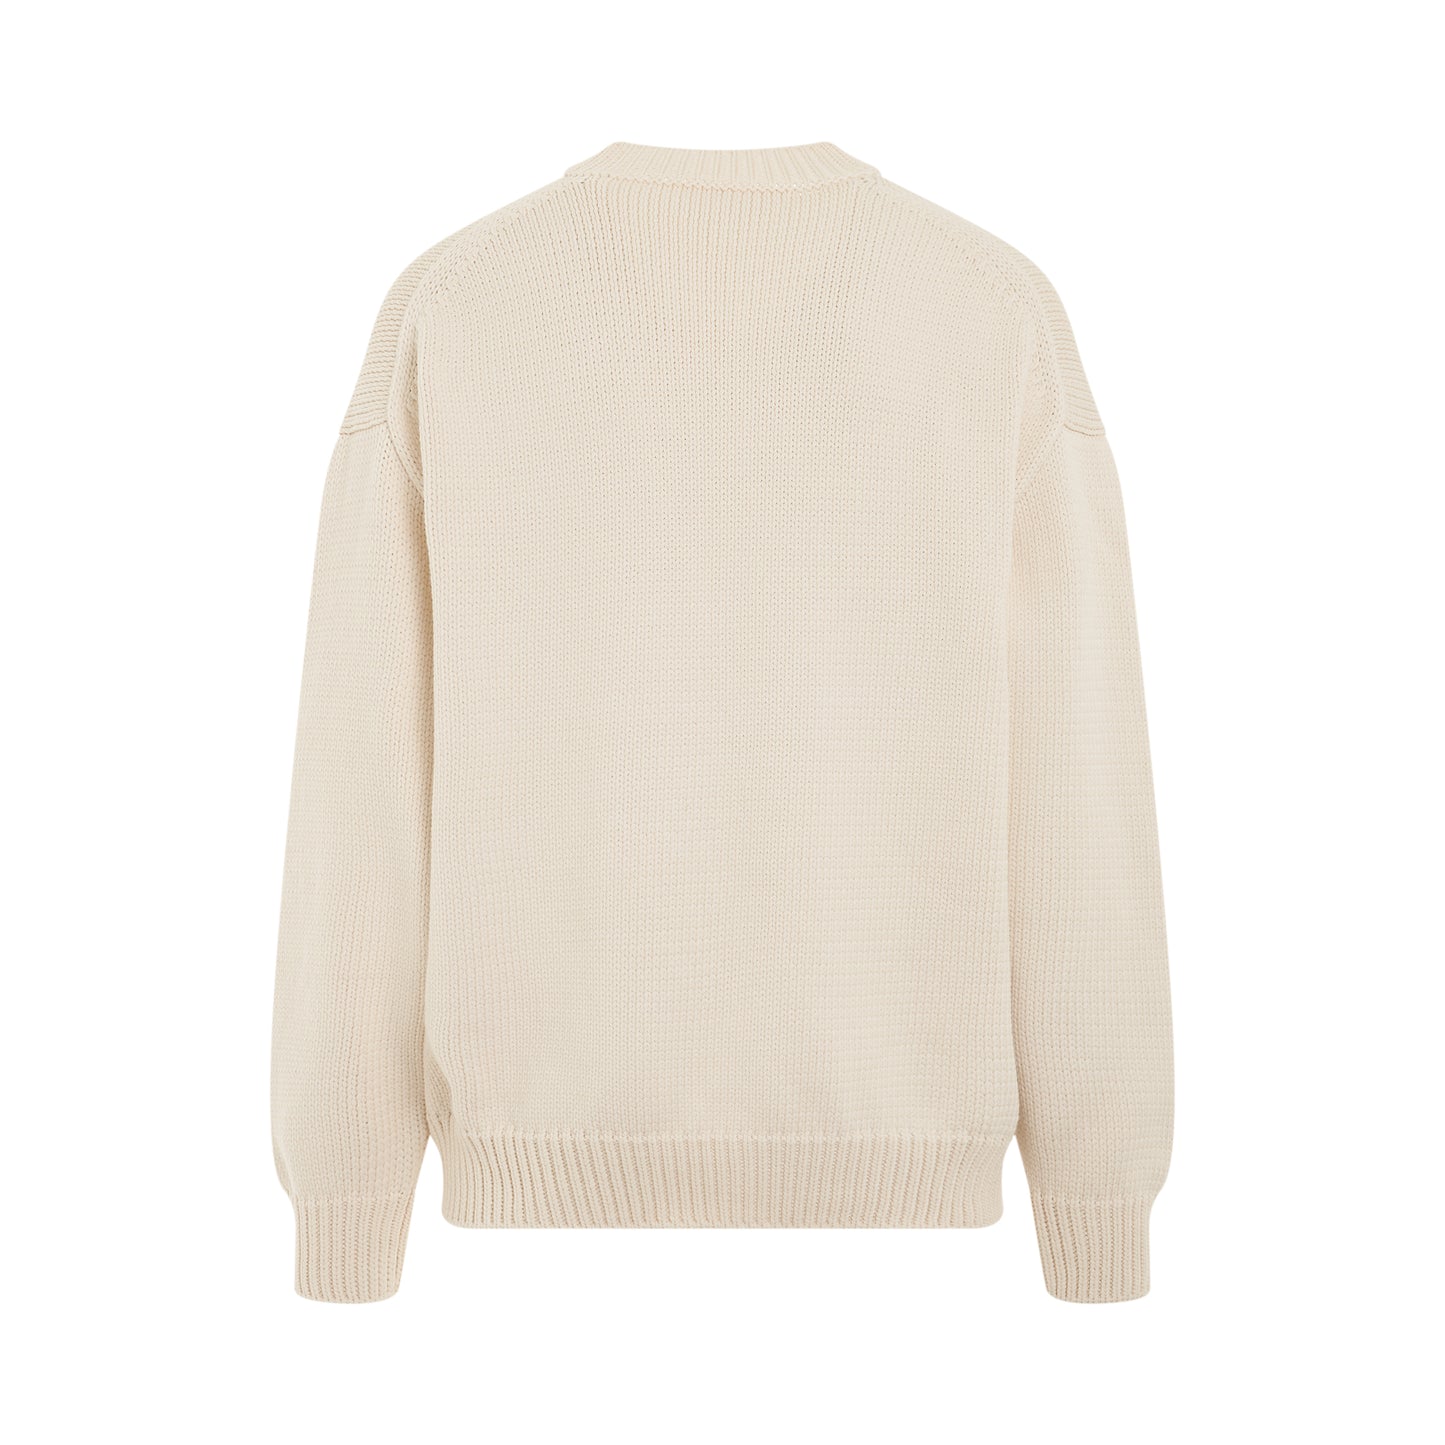 Cat Chunky Crewneck Sweater in Off White/Black